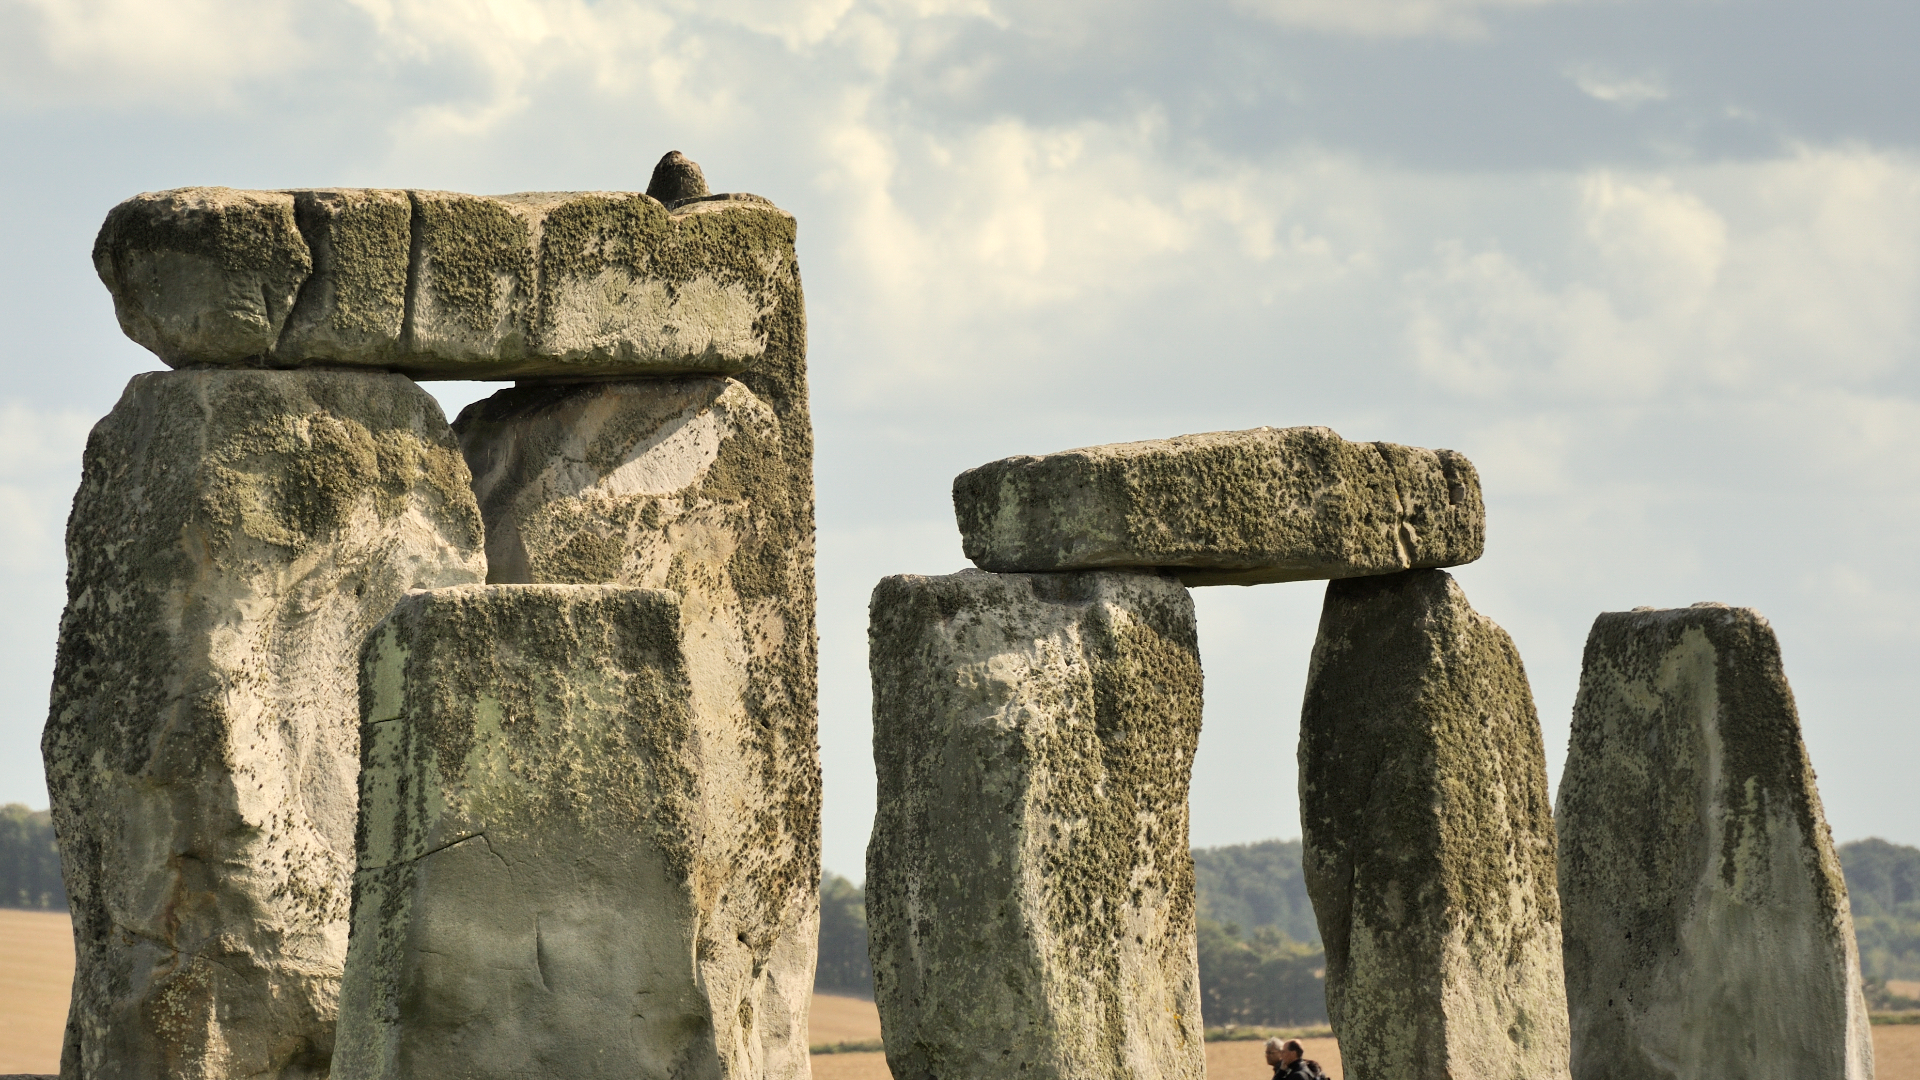 Denver Museum of Nature & Science to host "Stonehenge" beginning March 12, 2021.